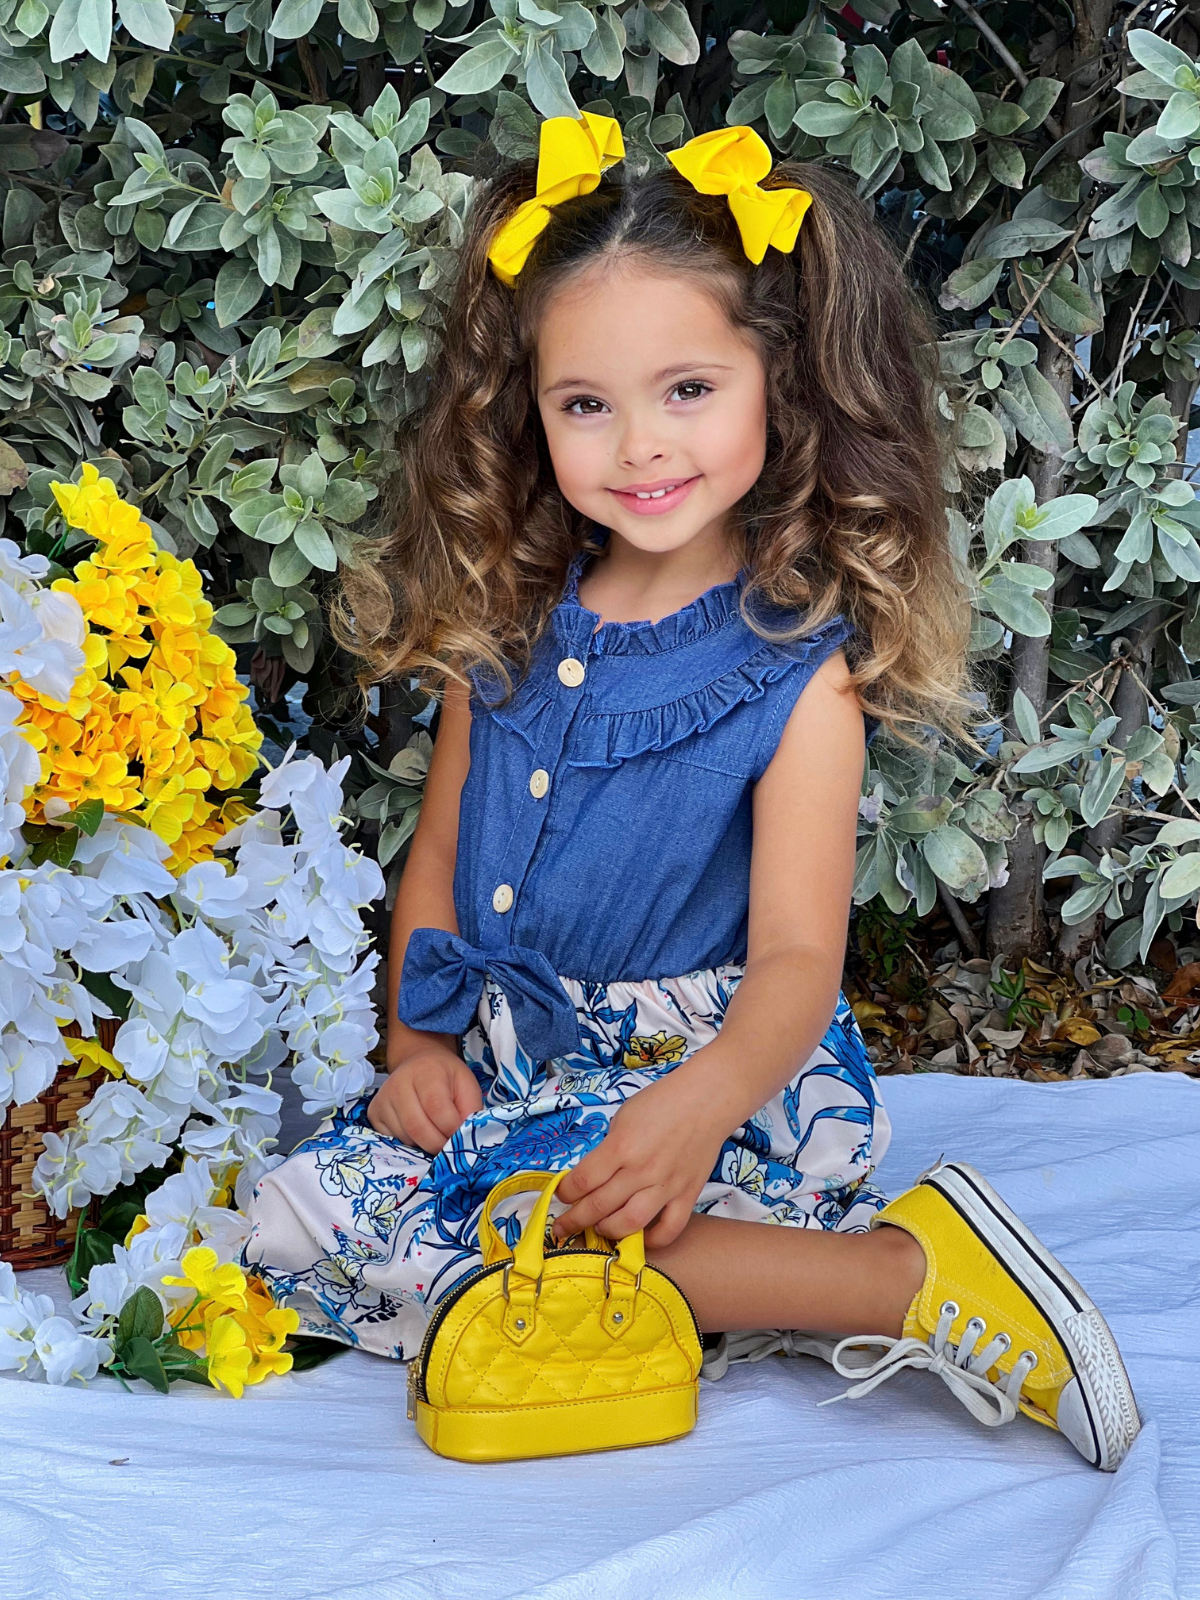 Toddler Spring Clothes | Girls Chambray Bodice Floral Skirt Dress